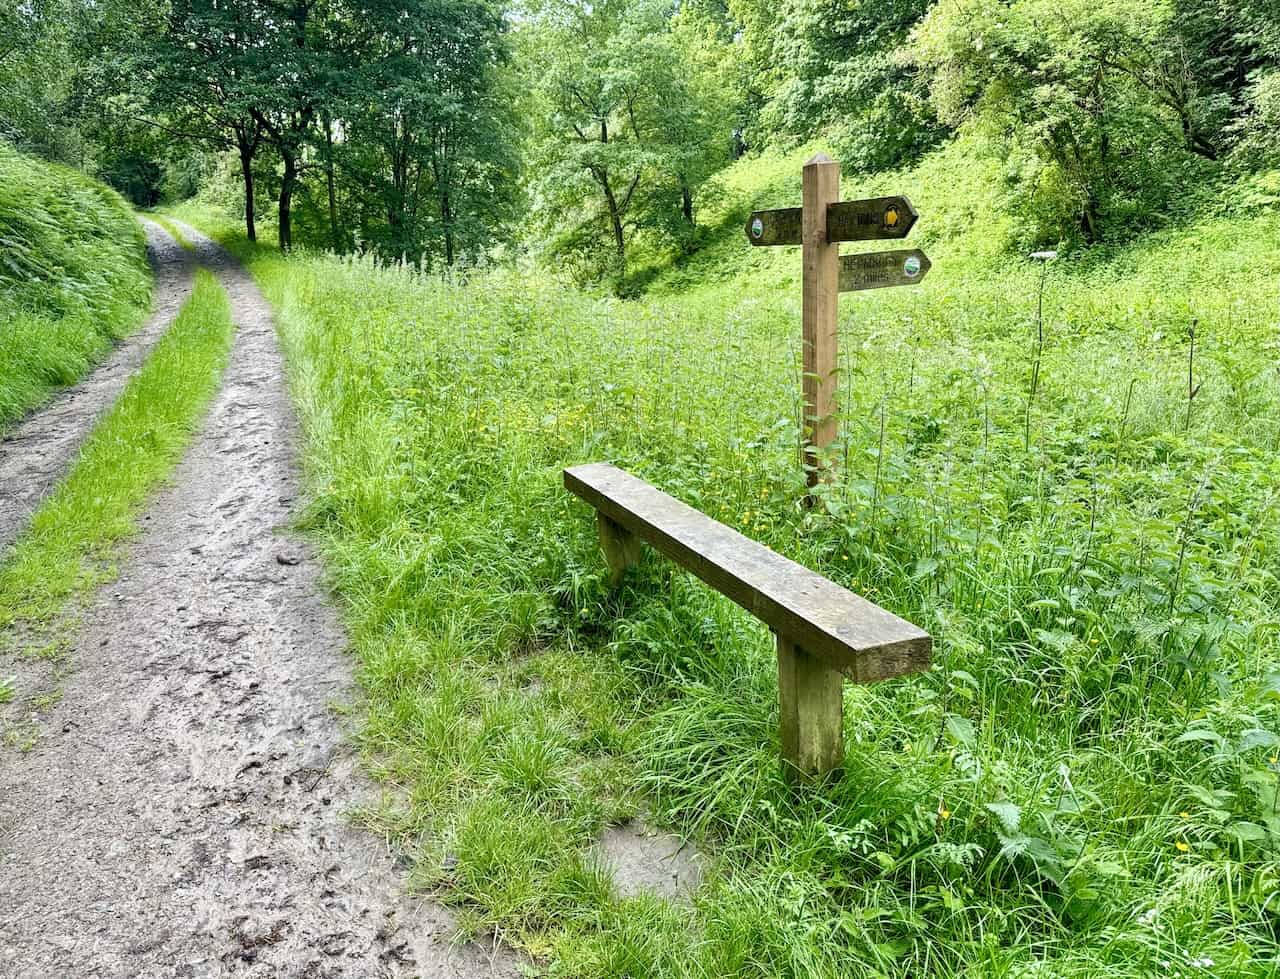 The time to leave the dale is marked by a bench and signpost. The route is signposted to Carlton. This is a key section of this Helmsley circular walk.